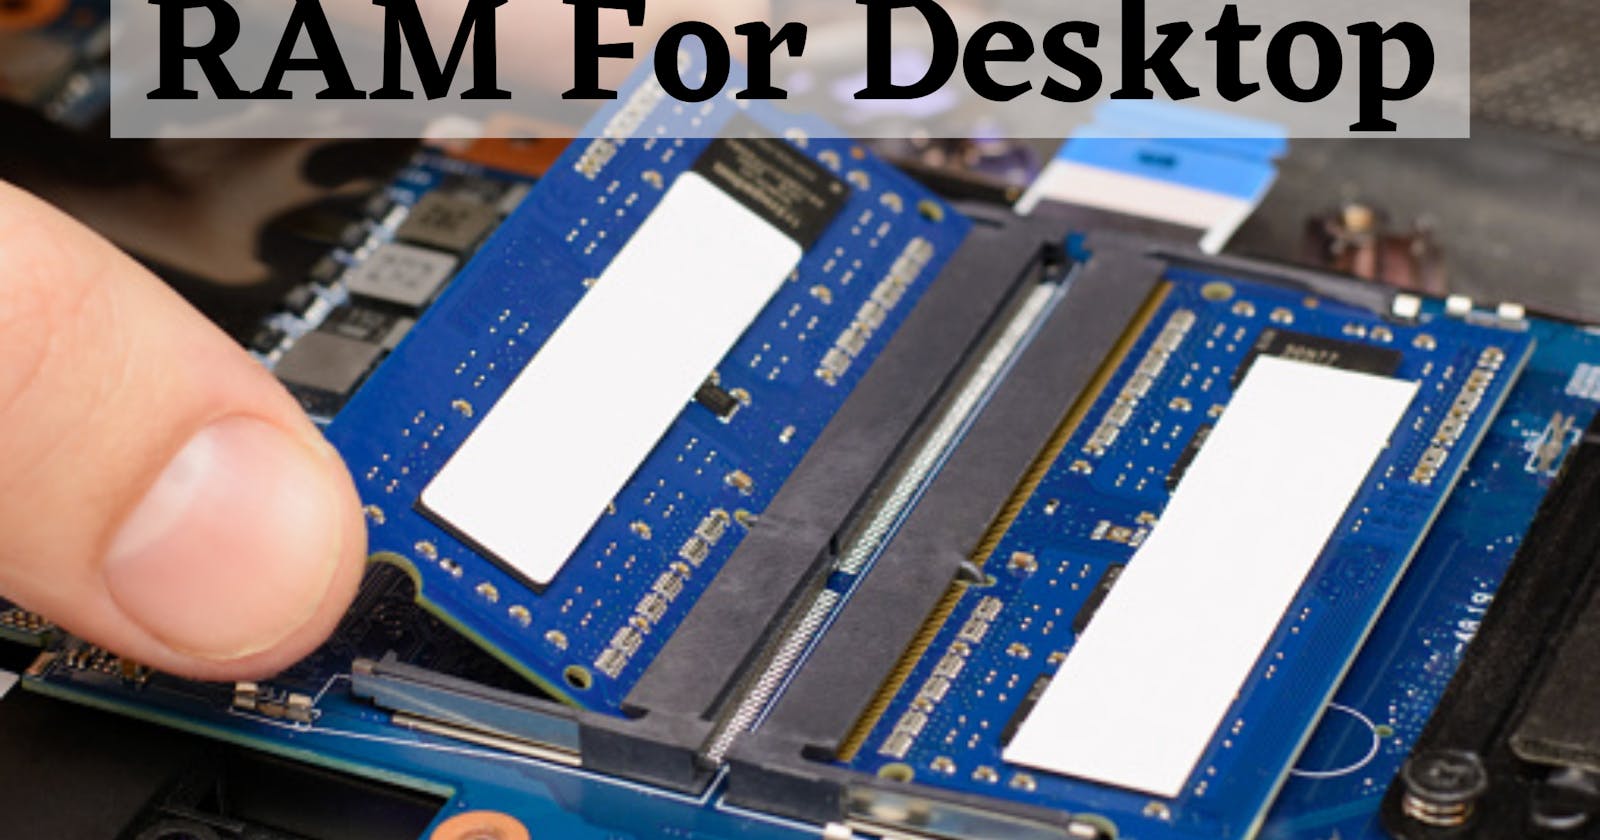 How To Select The Right RAM For Your Desktop?